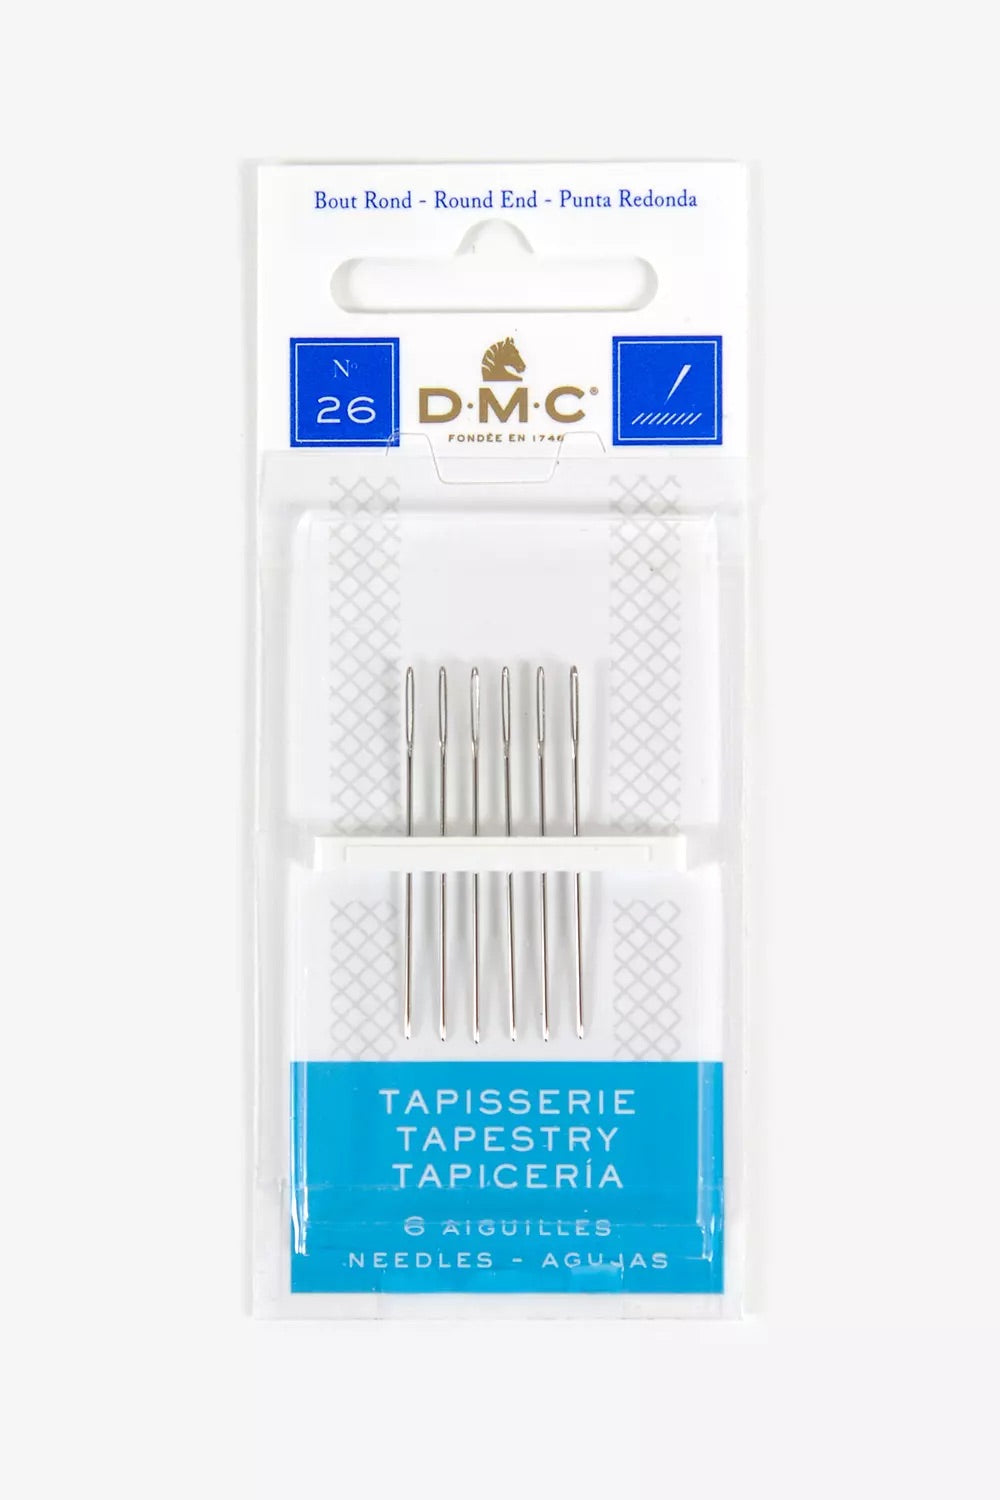 DMC Hand Sewing Needles - Tapestry - Size 26 - Sewfinity.com